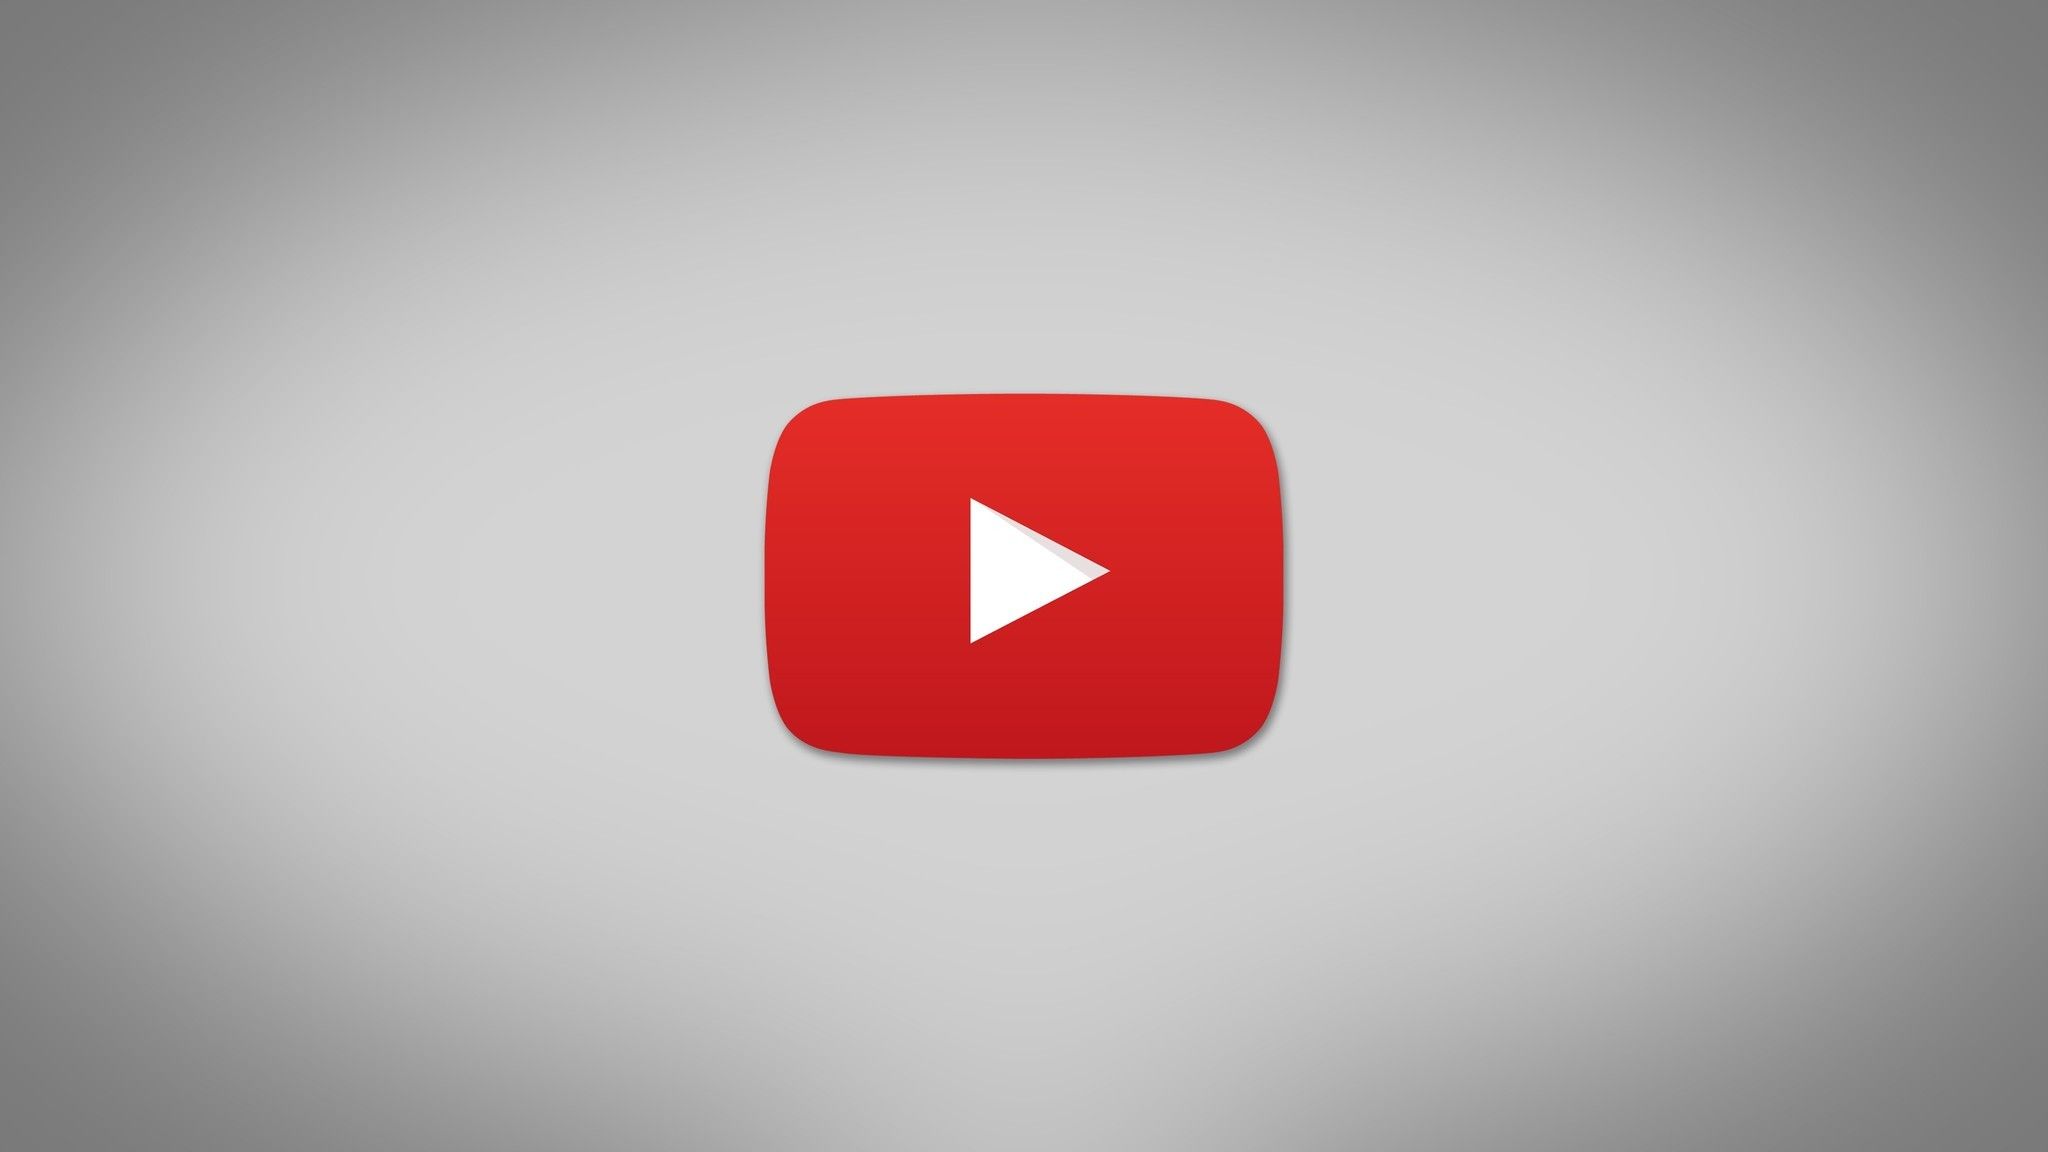 YouTube Play Button Wallpaper 66868 2048x1152px